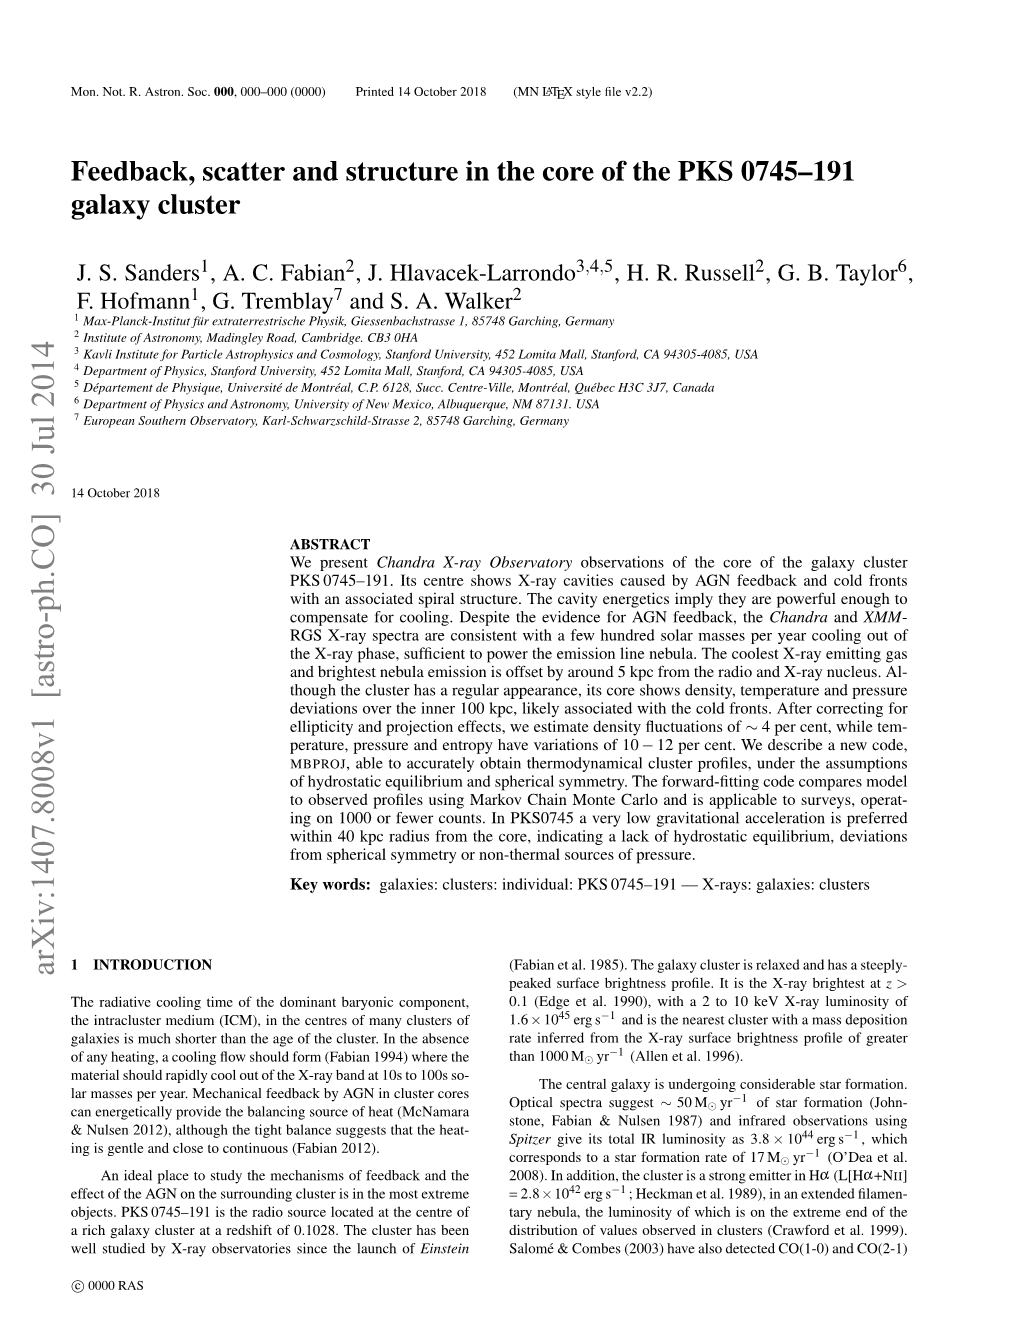 Feedback, Scatter and Structure in the Core of the PKS 0745-191 Galaxy